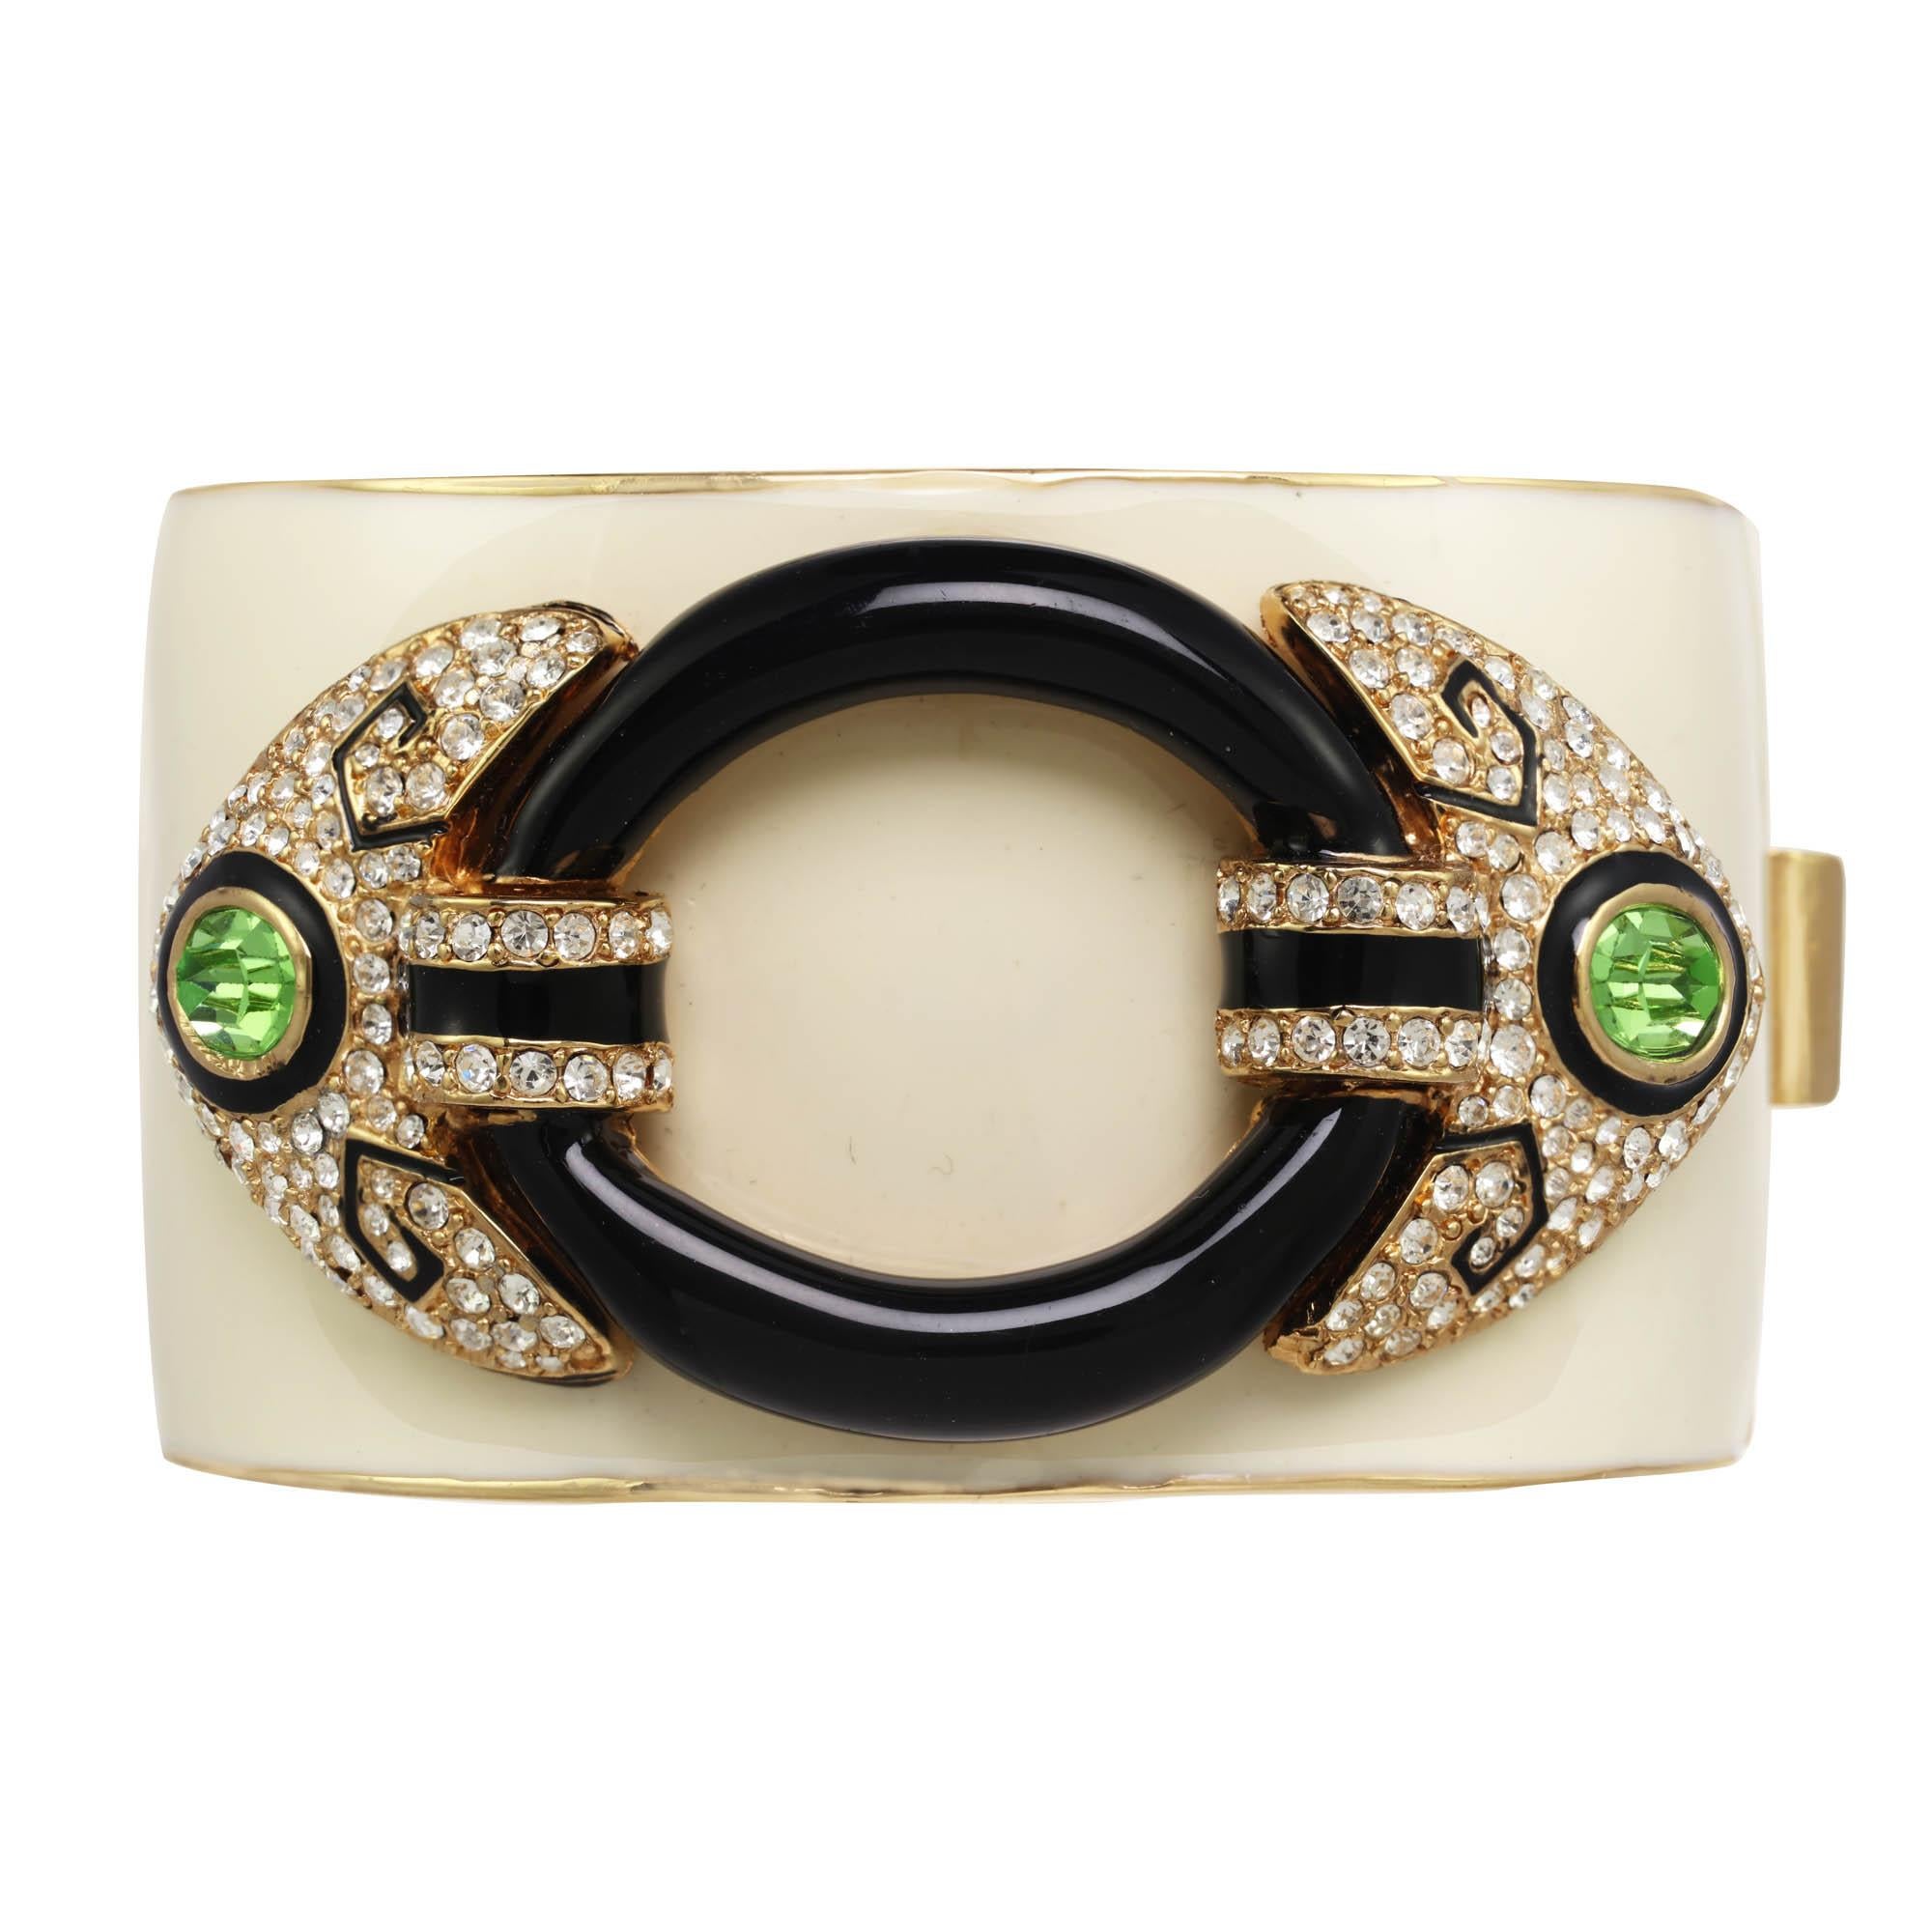 This art deco inspired cuff has vintage appeal. 

PLEASE NOTE: The pieces available are not vintage and are not reproductions.
CINER uses original models to produce our jewelry today.
If you would like to custom order this piece, please message